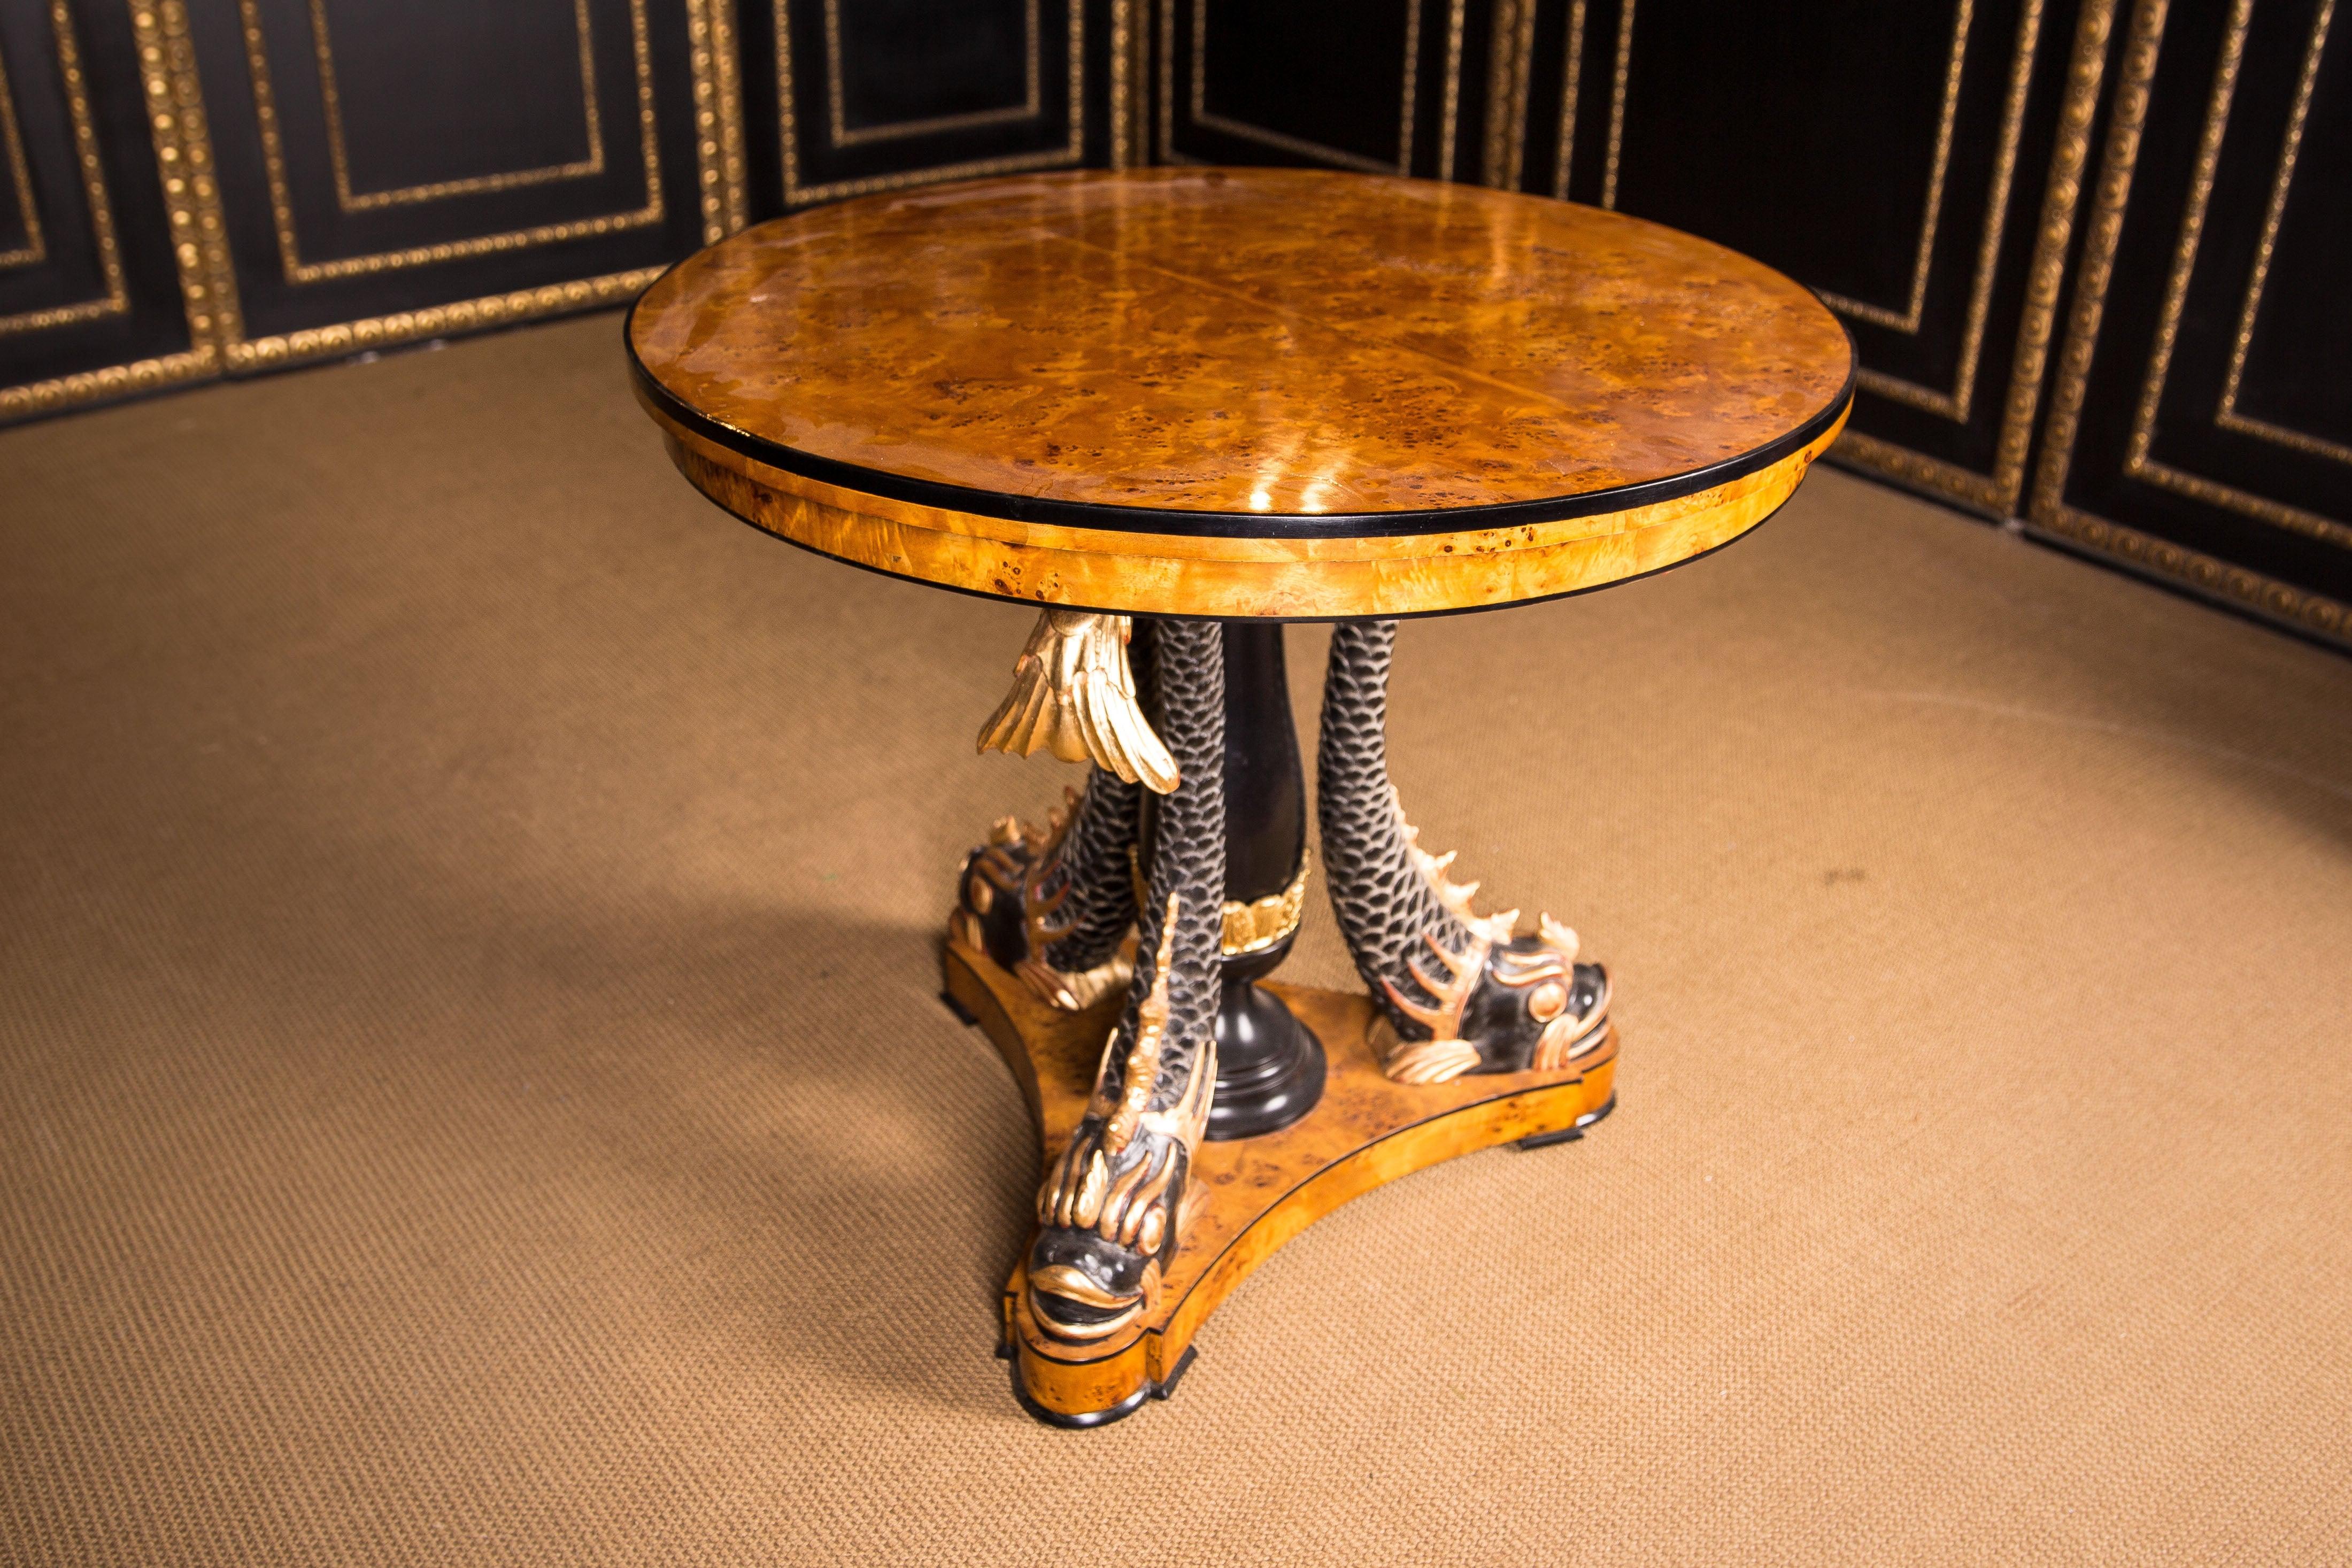 Birdseye Maple Majestic Table with Dolphins in the Antique Empire Style Birdseye maple carved For Sale